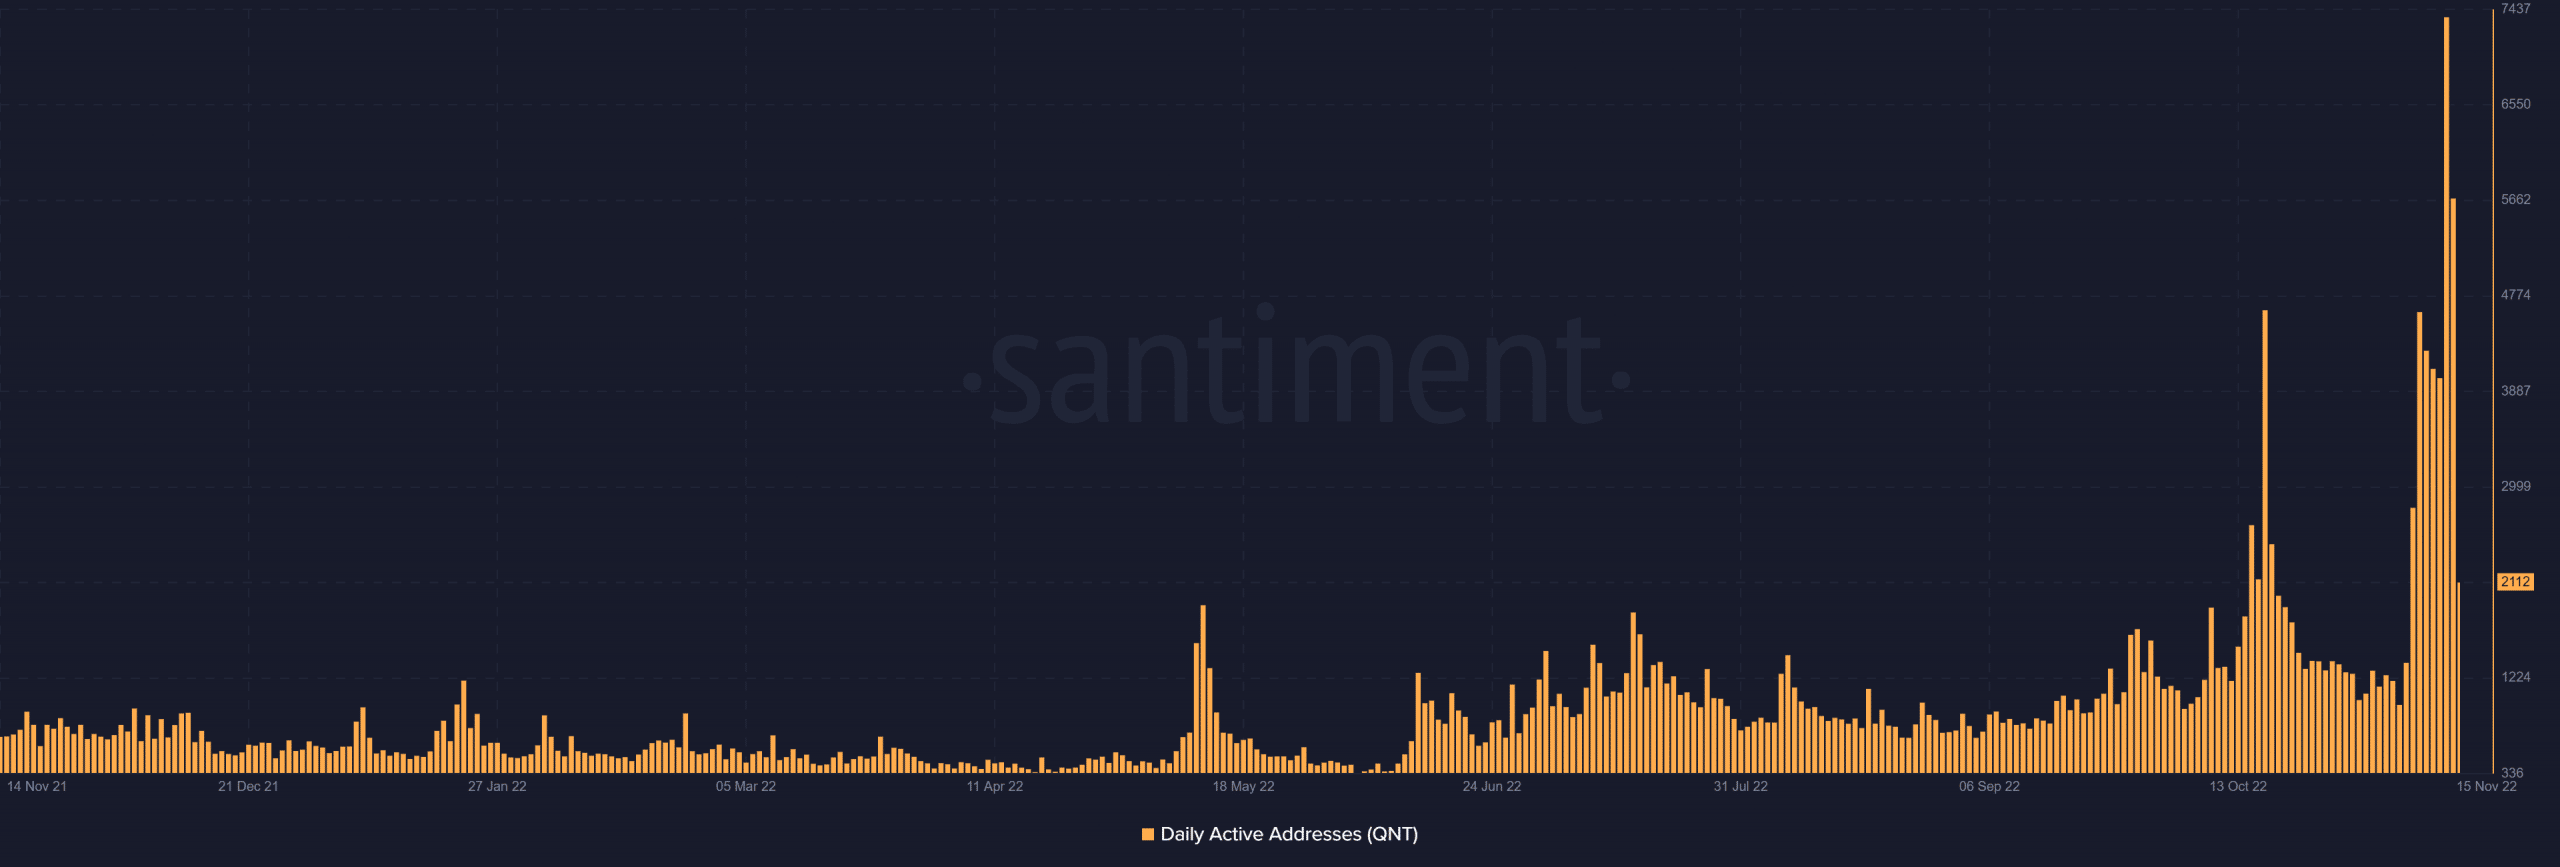 Quant's daily active addresses